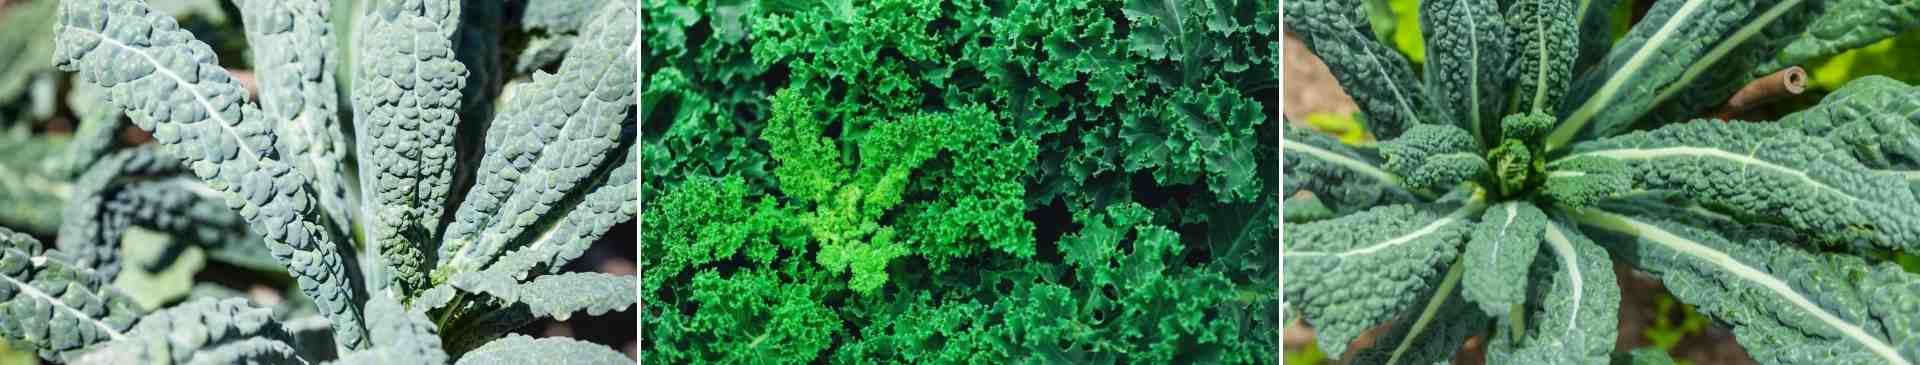 Kale: Much More Than a Superfood Cliche